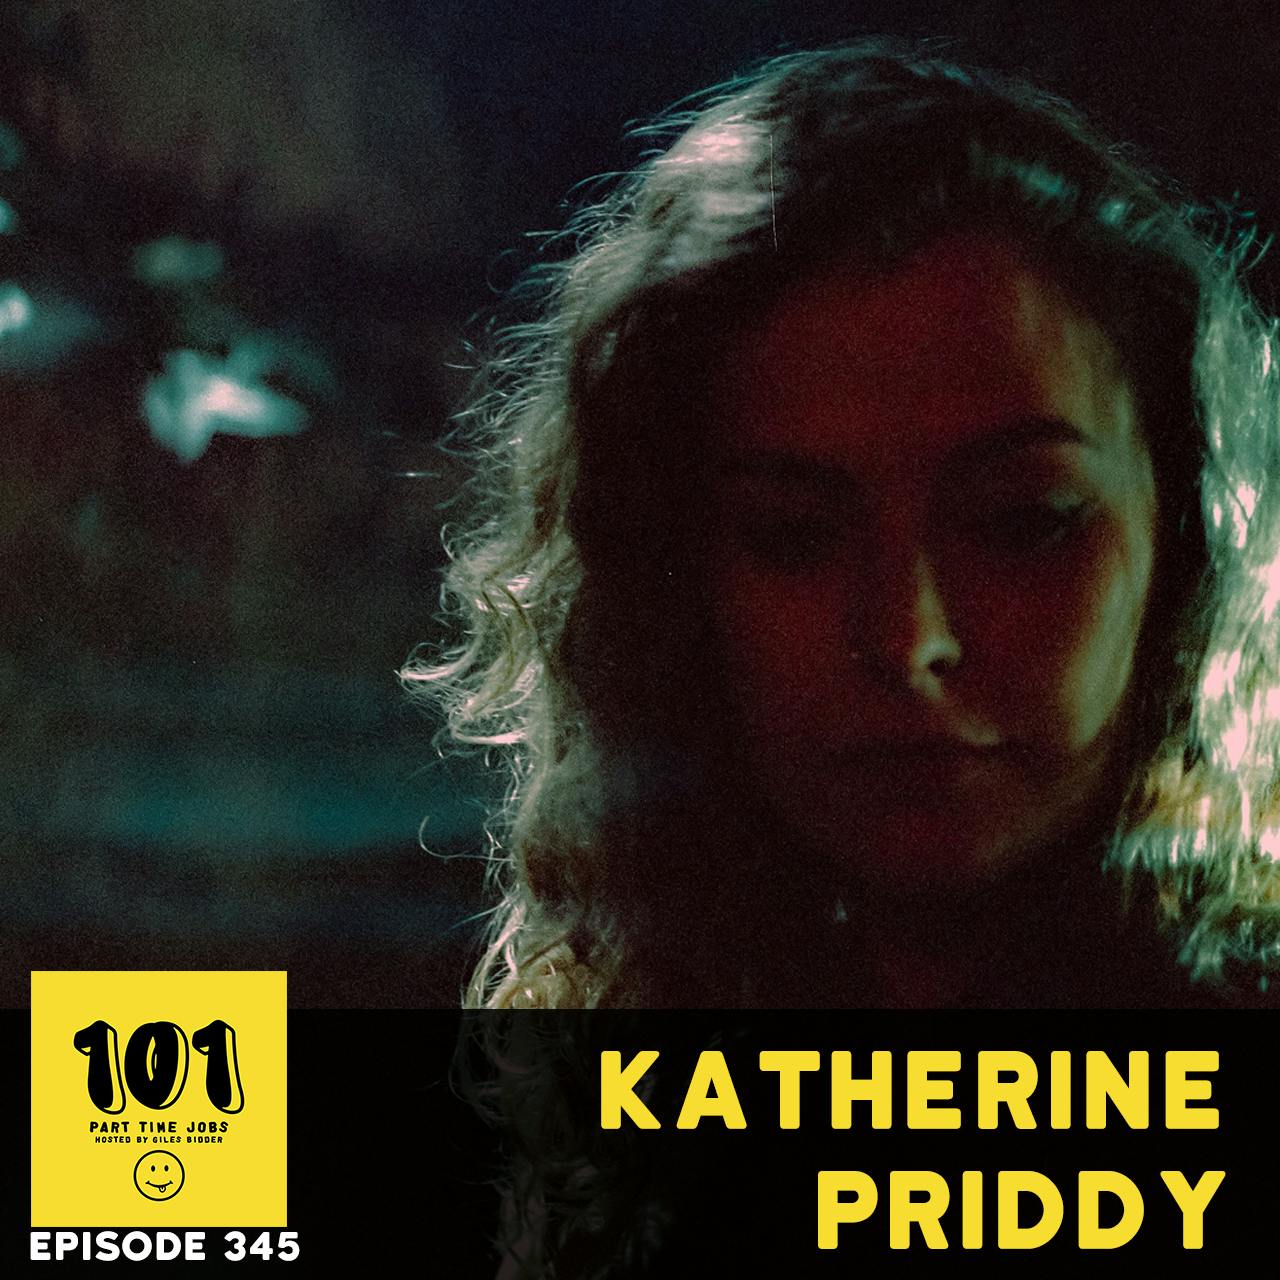 Katherine Priddy - ”My first gig outside of my village was at the O2”